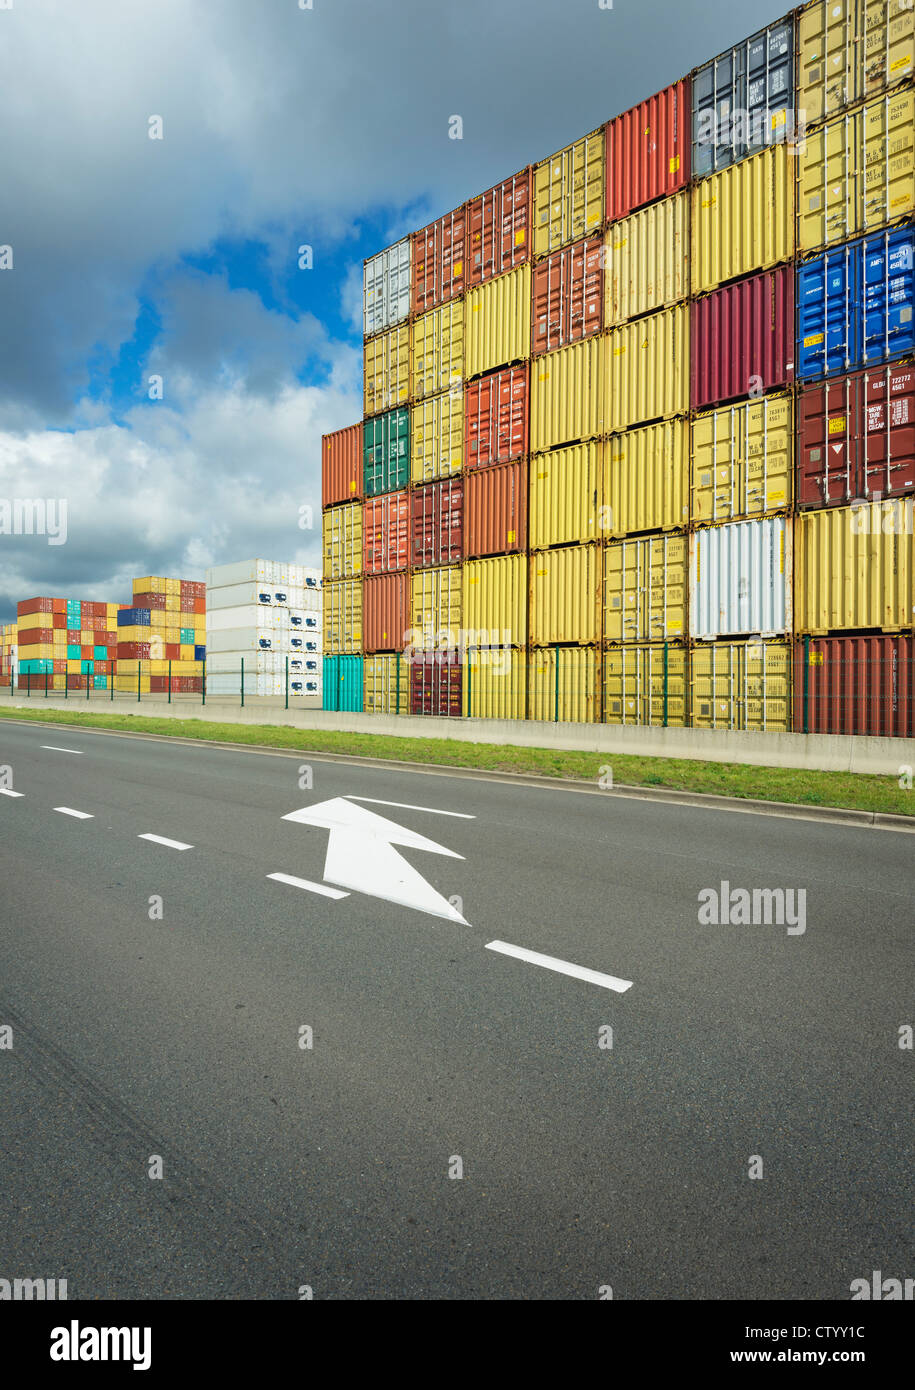 Shipping containers stacked together Stock Photo